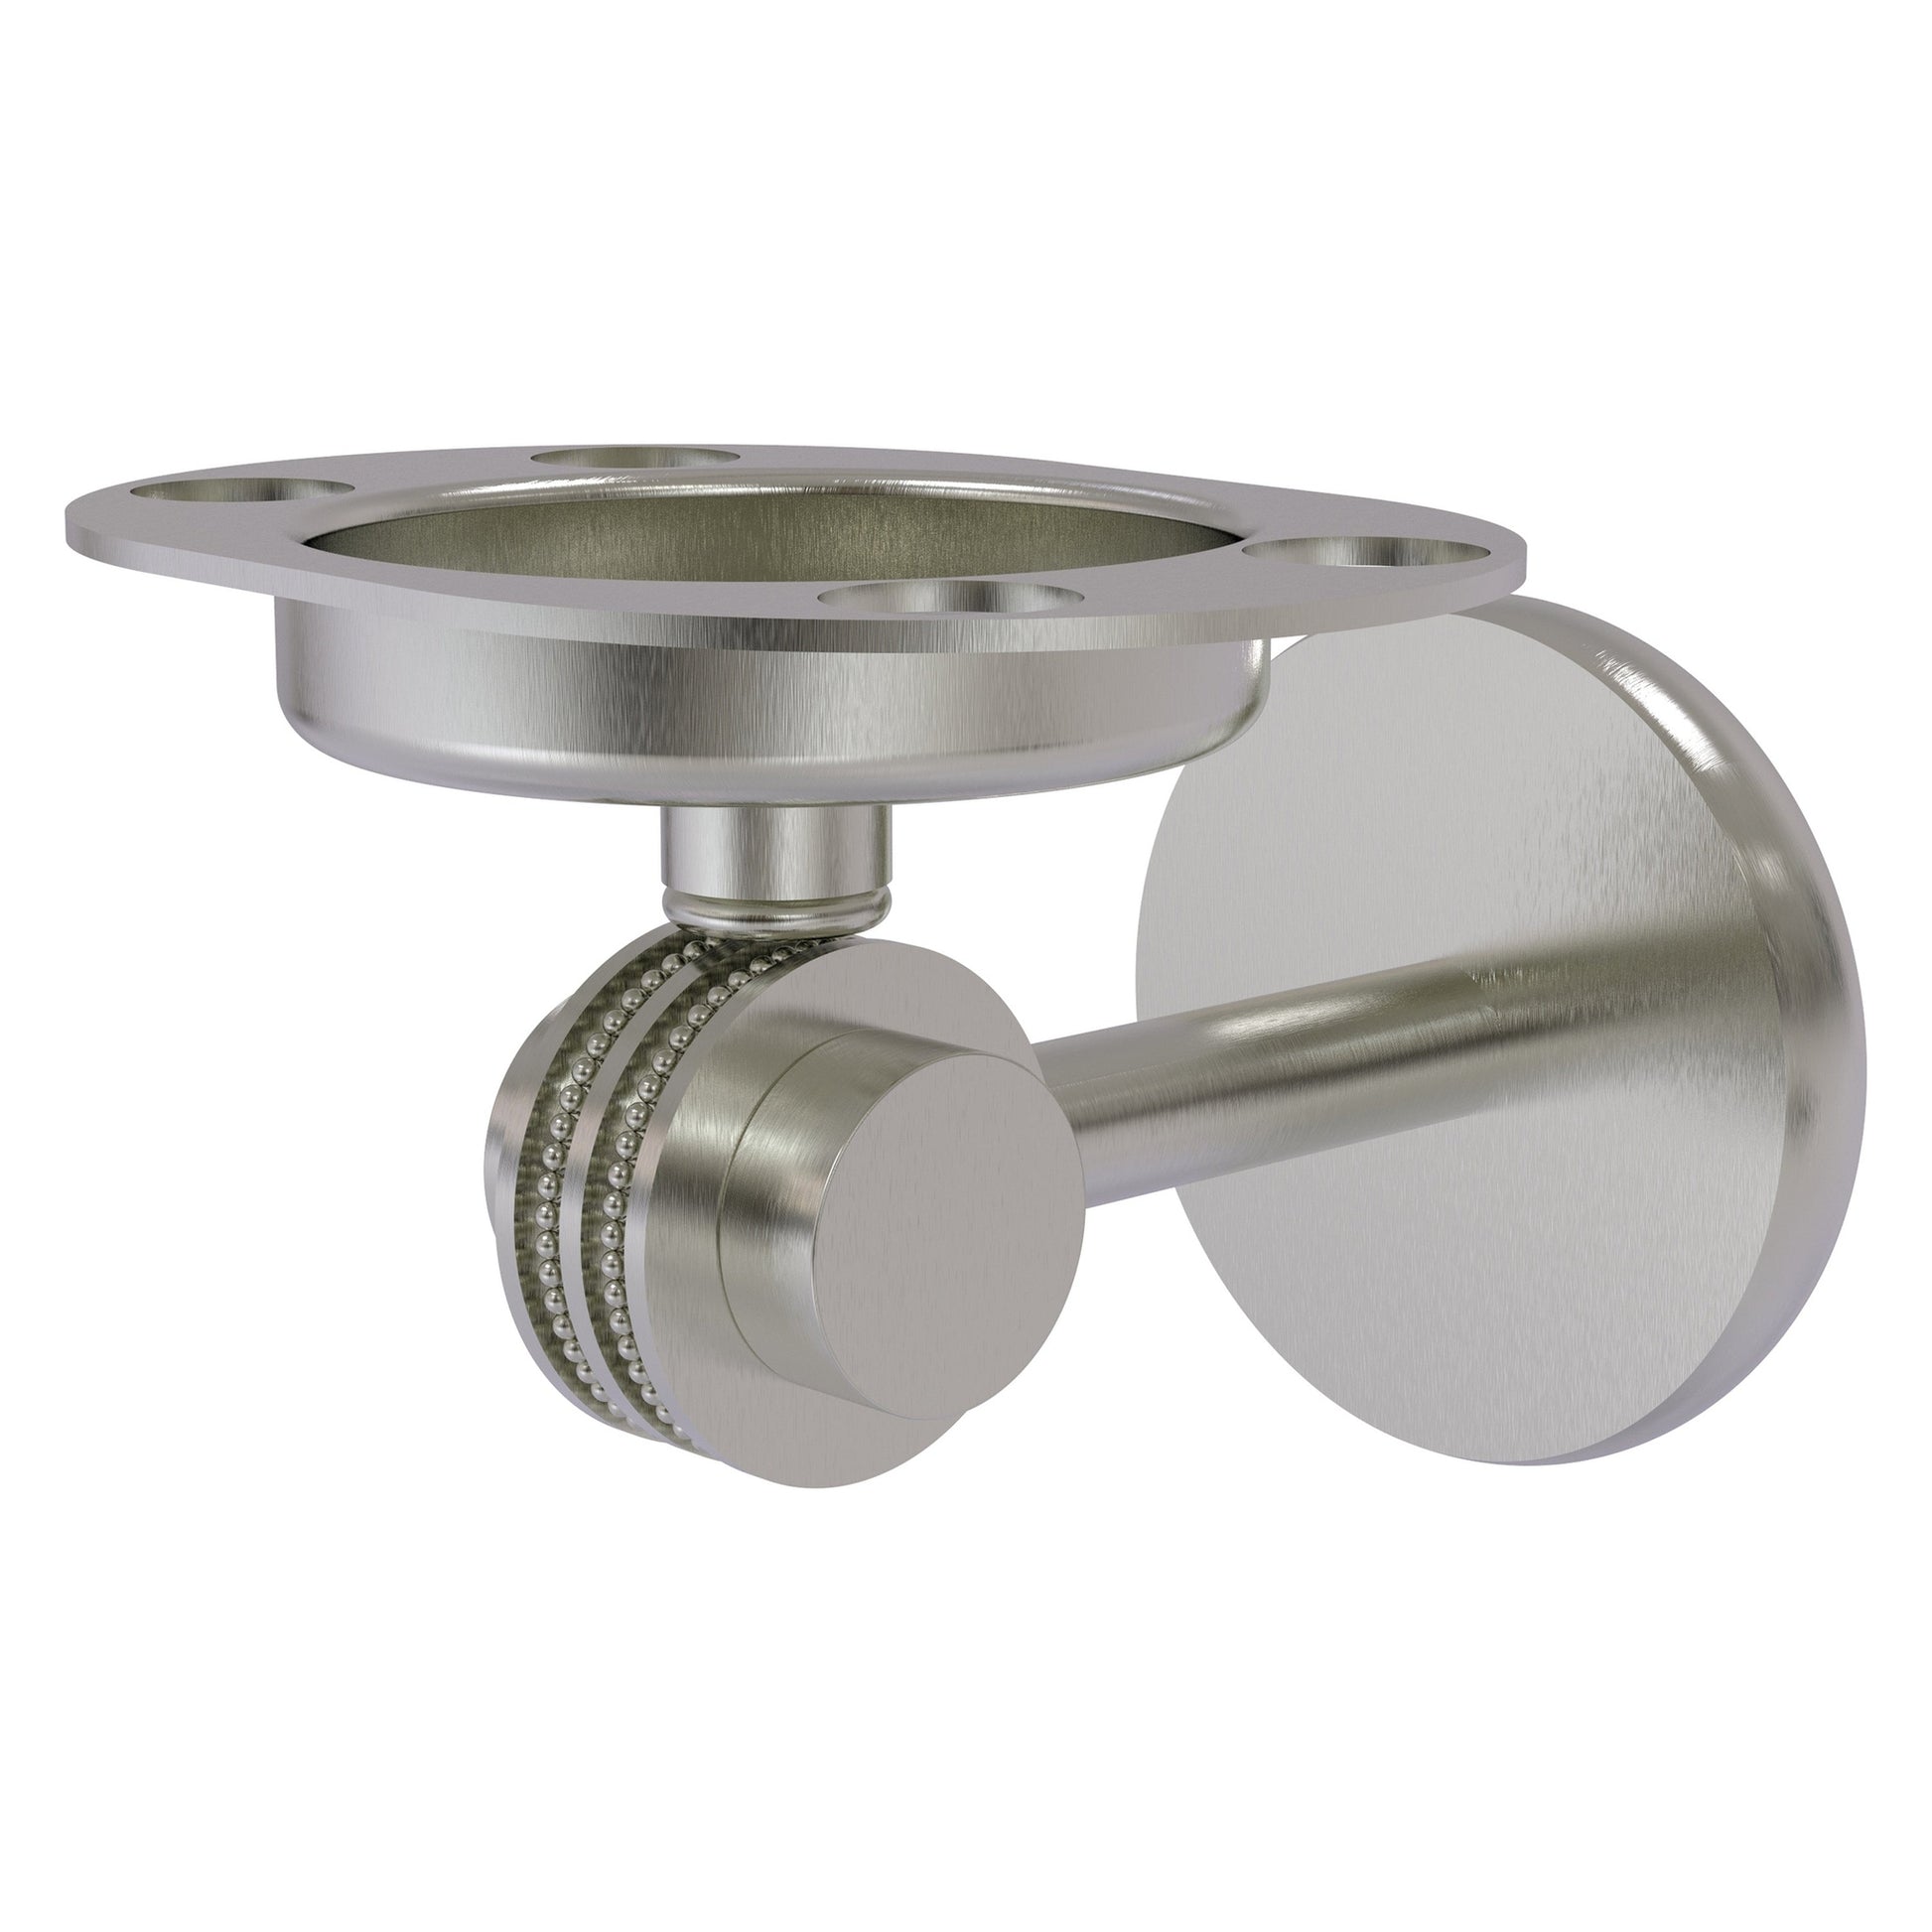 Allied Brass Satellite Orbit Two 4.5" x 3.5" Satin Nickel Solid Brass Tumbler and Toothbrush Holder With Dotted Accents